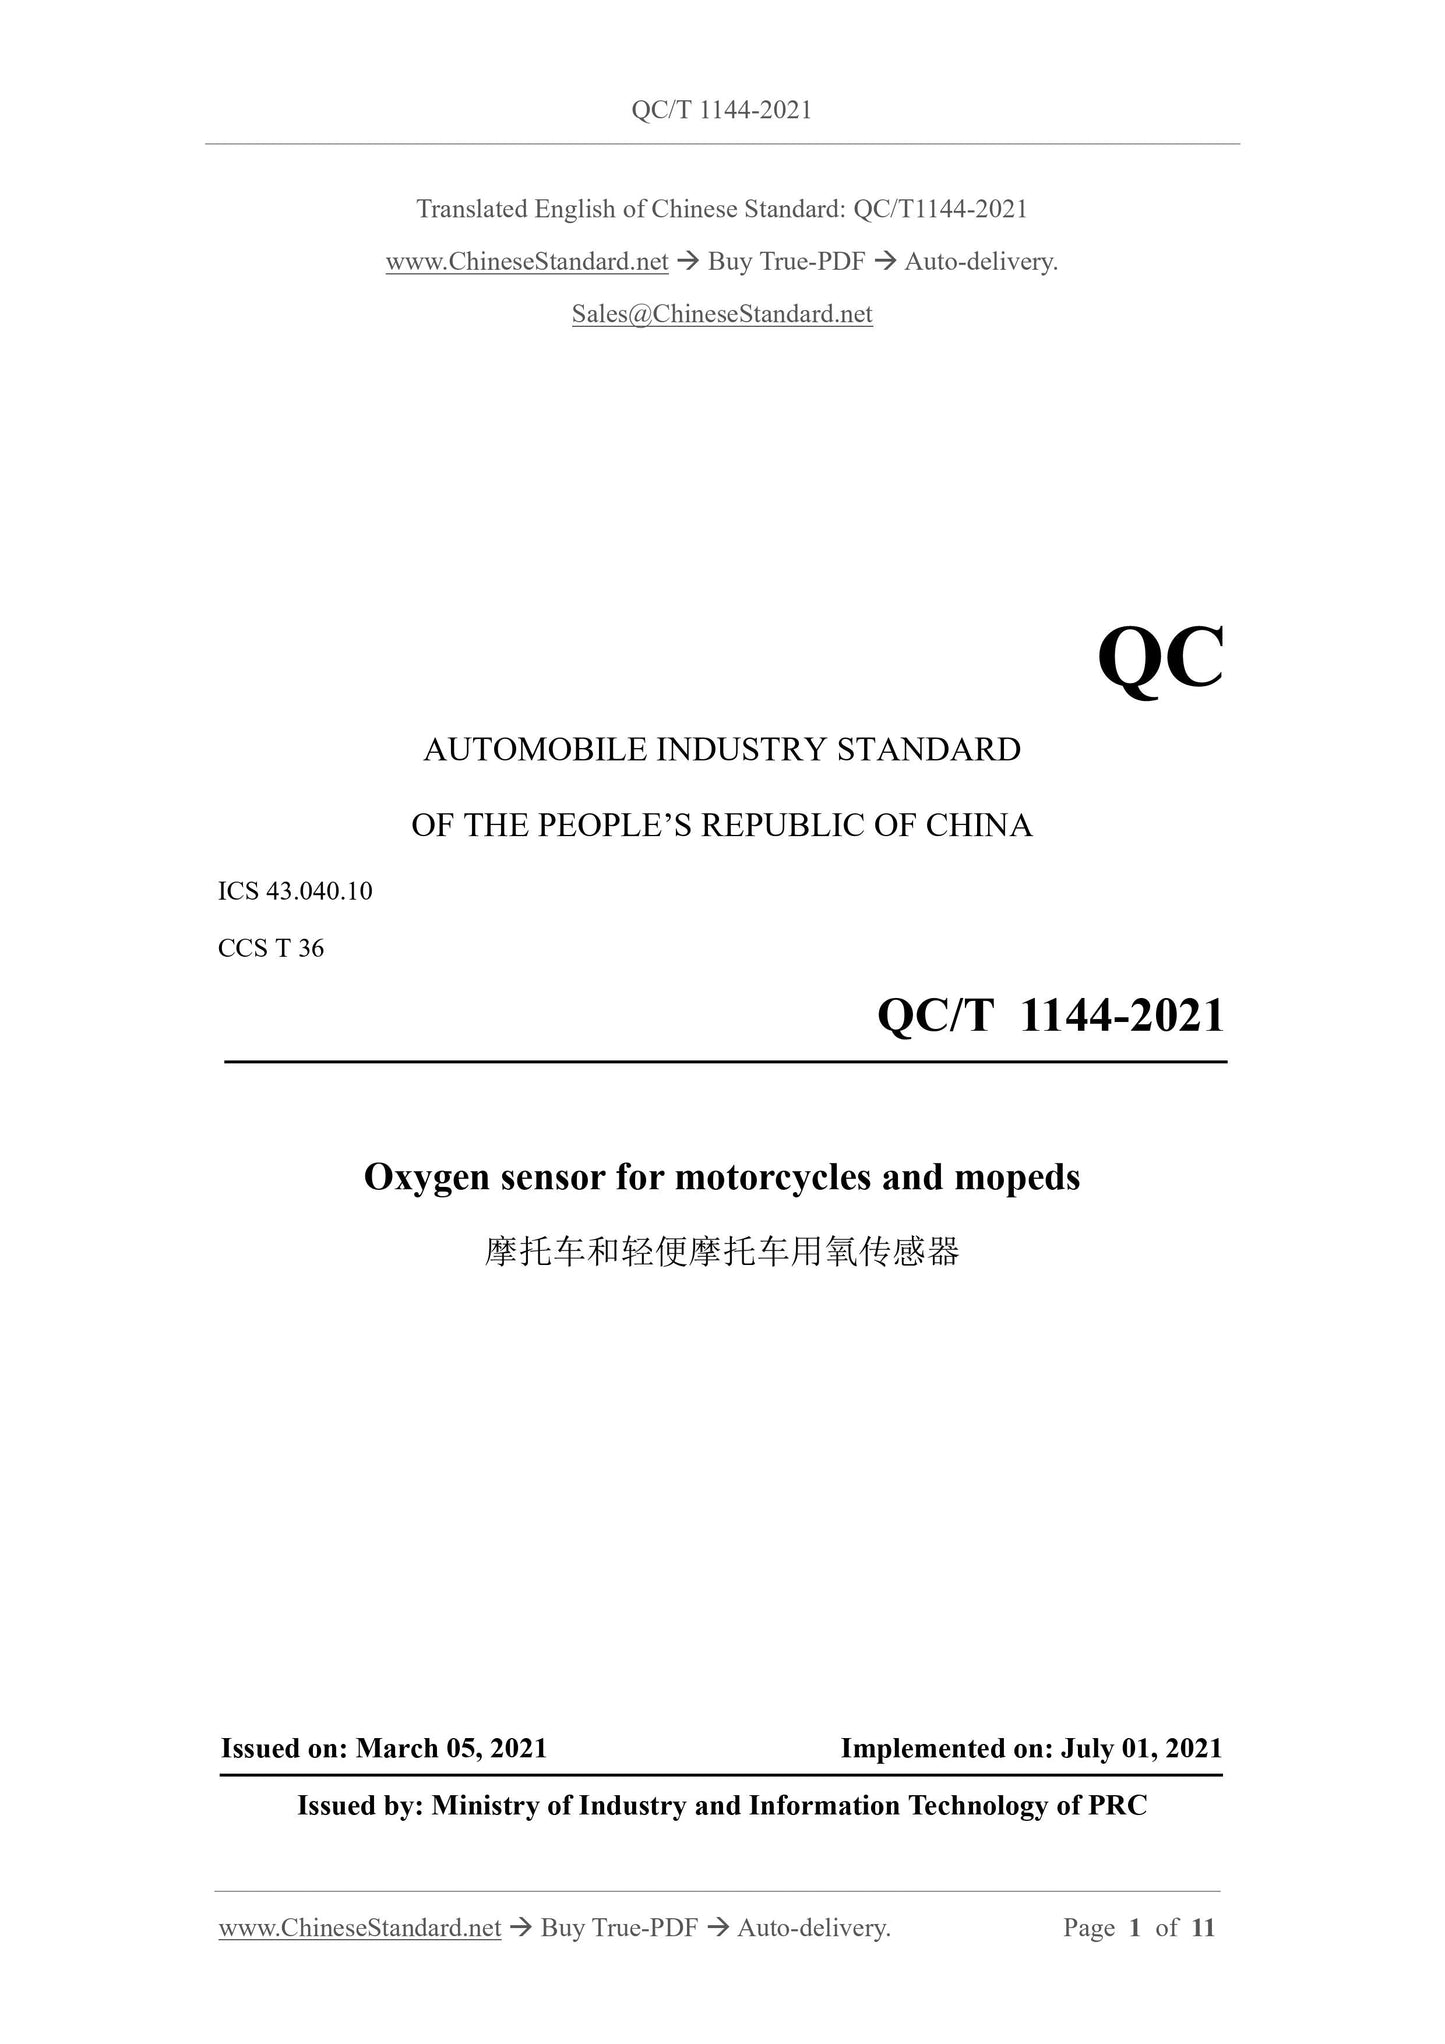 QC/T 1144-2021 Page 1